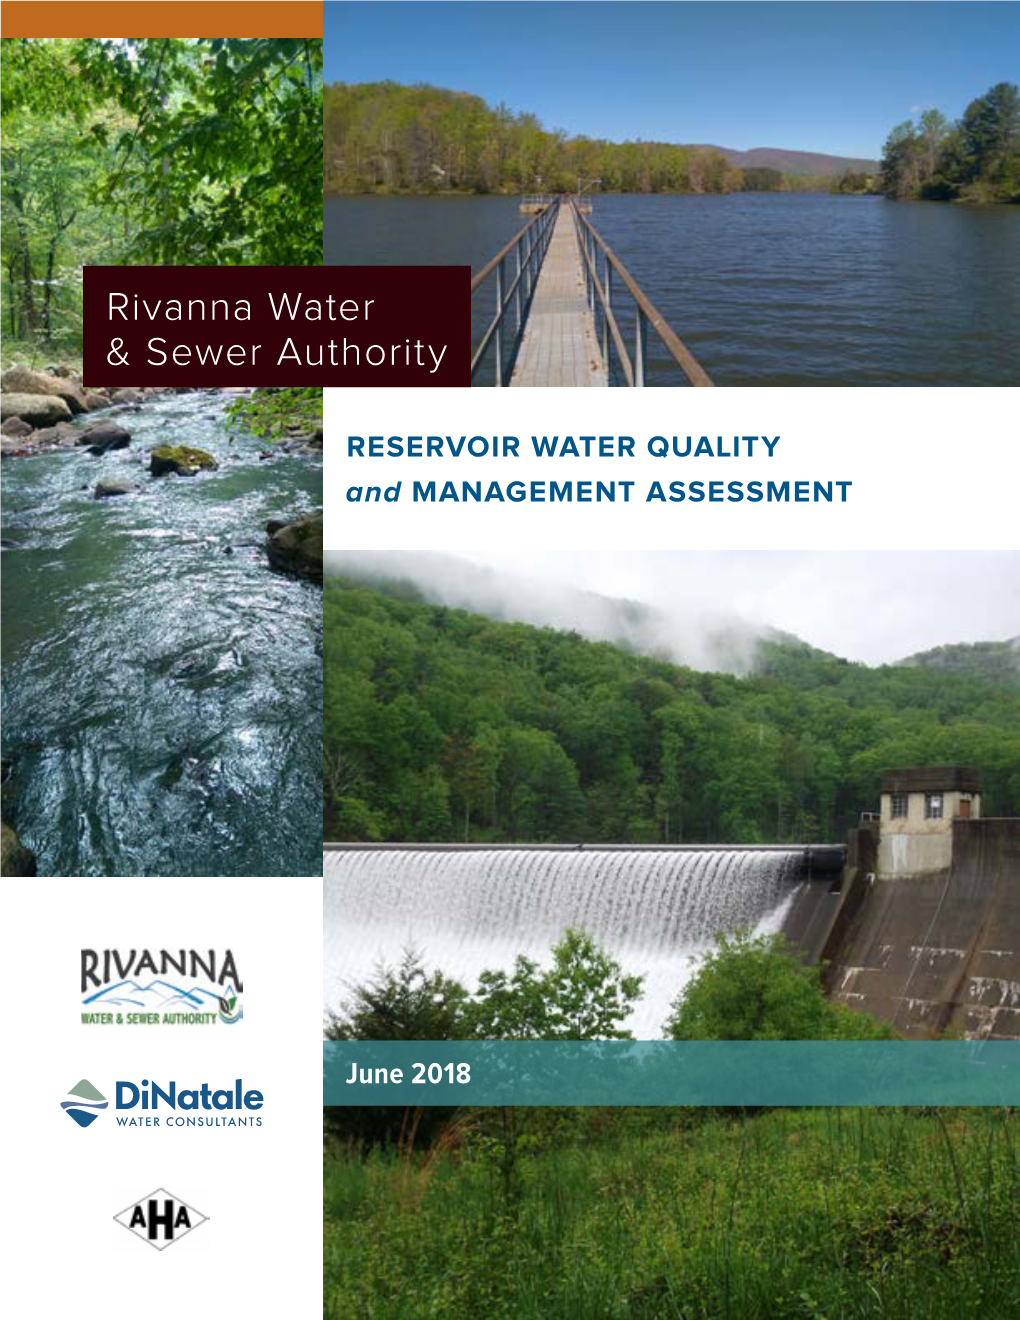 Rivanna Water & Sewer Authority